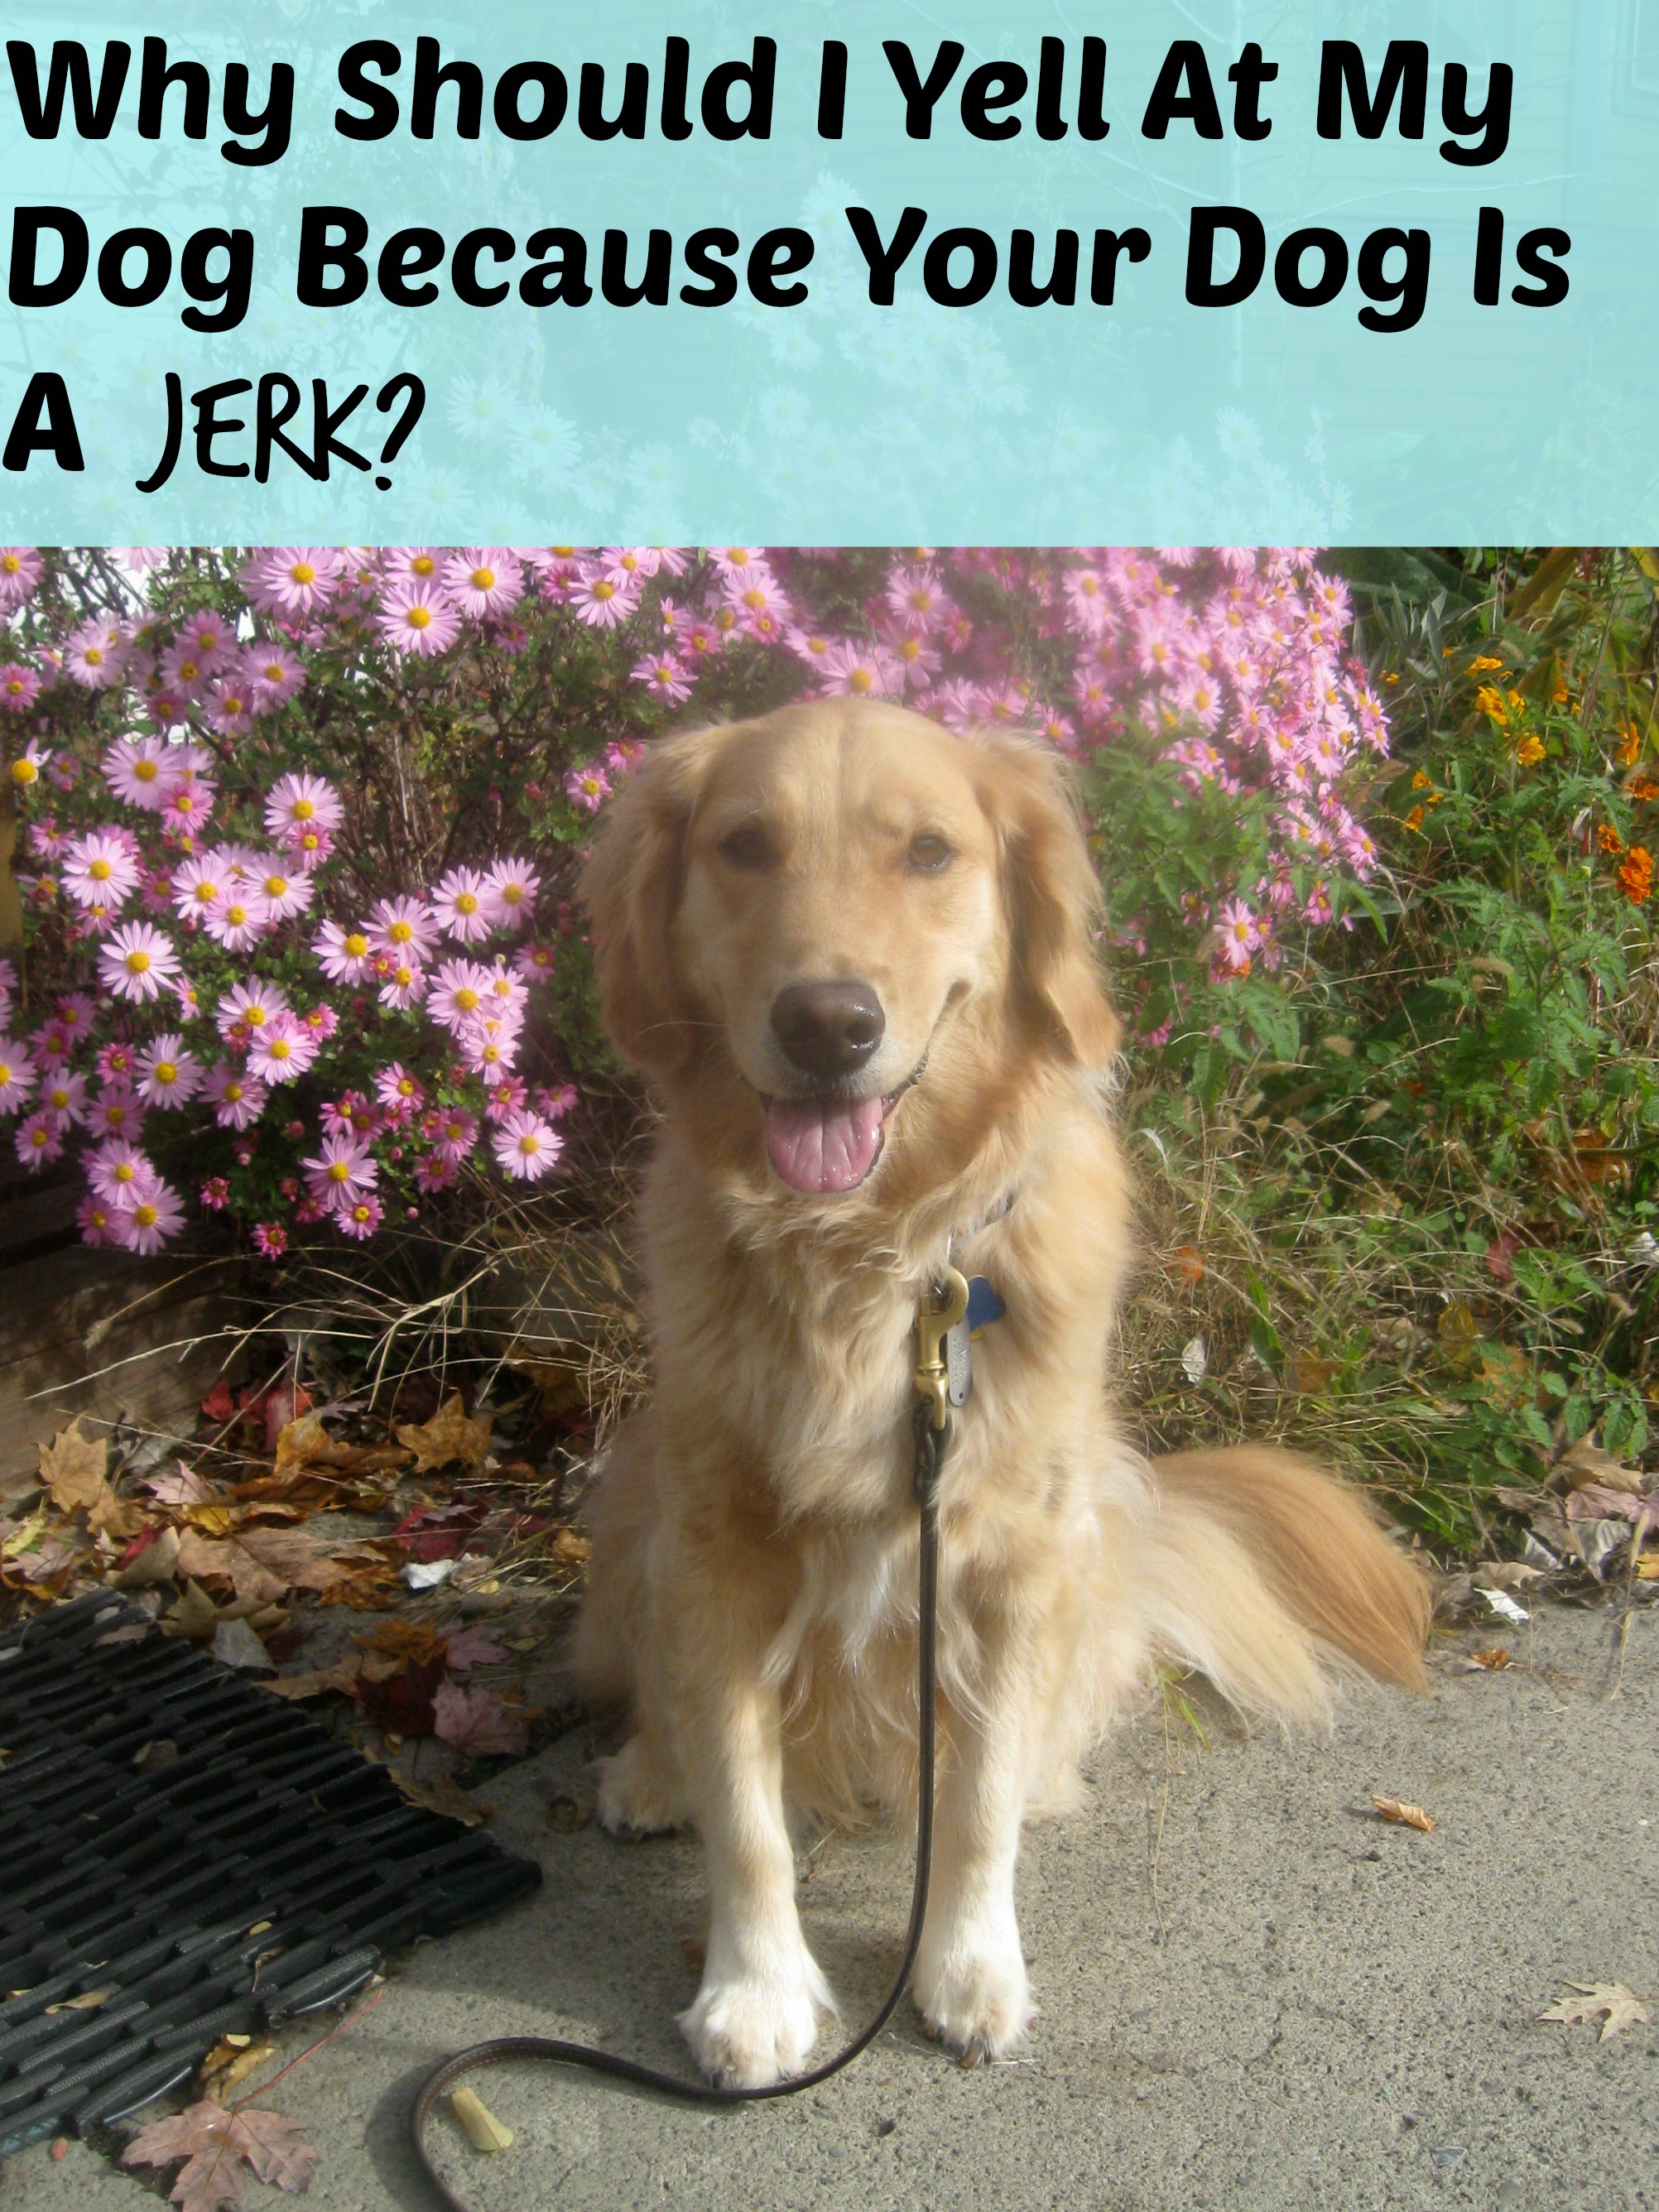 Honey the golden retriever and a statement about jerk dogs.